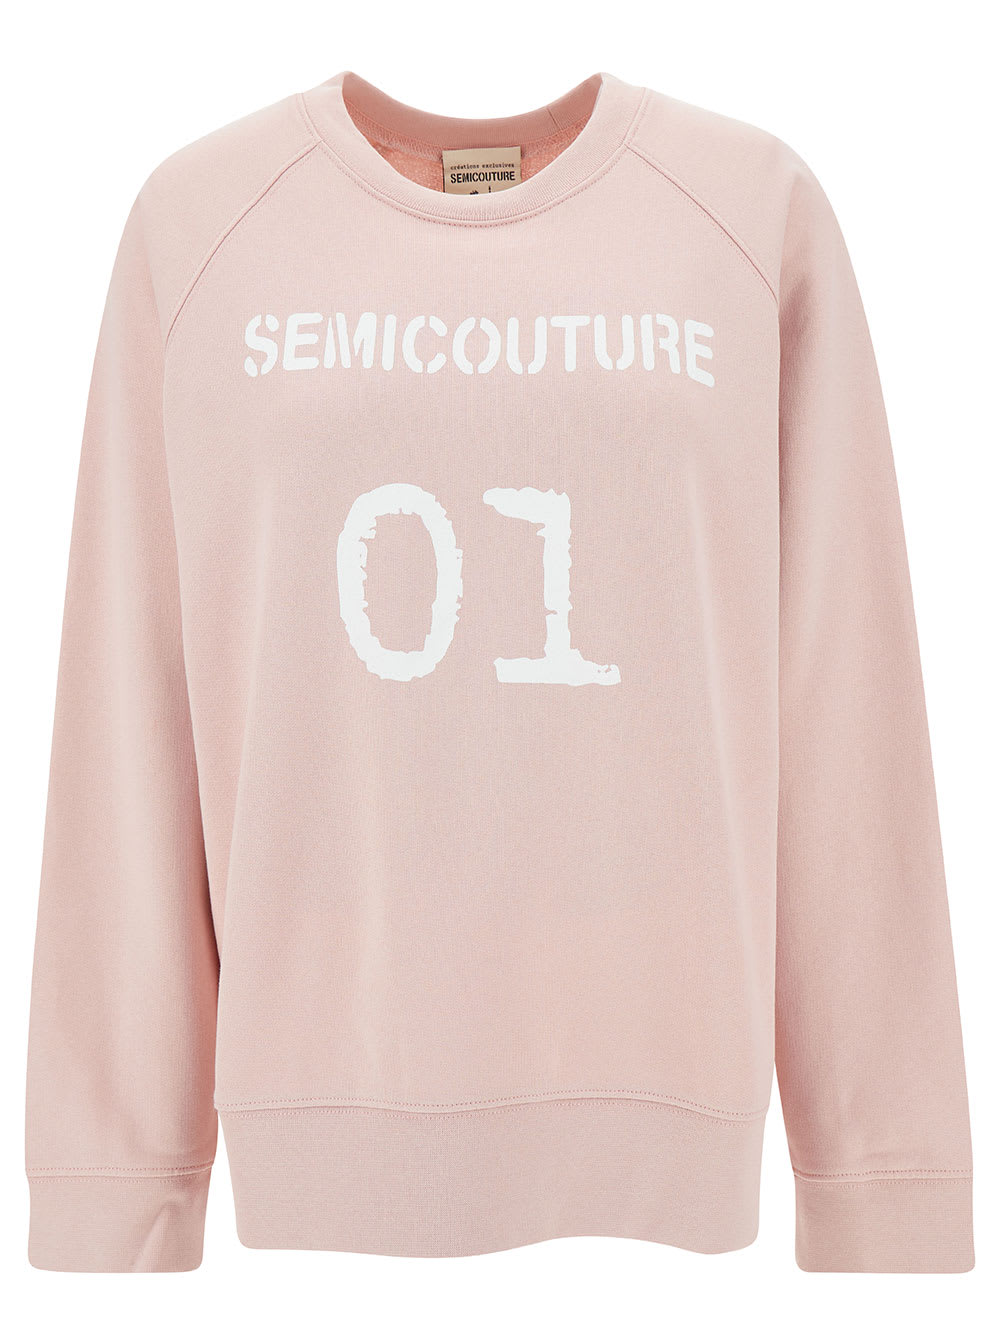 SEMICOUTURE PINK CREWNECK SWEATSHIRT WITH LOGO PRINT IN COTTON WOMAN